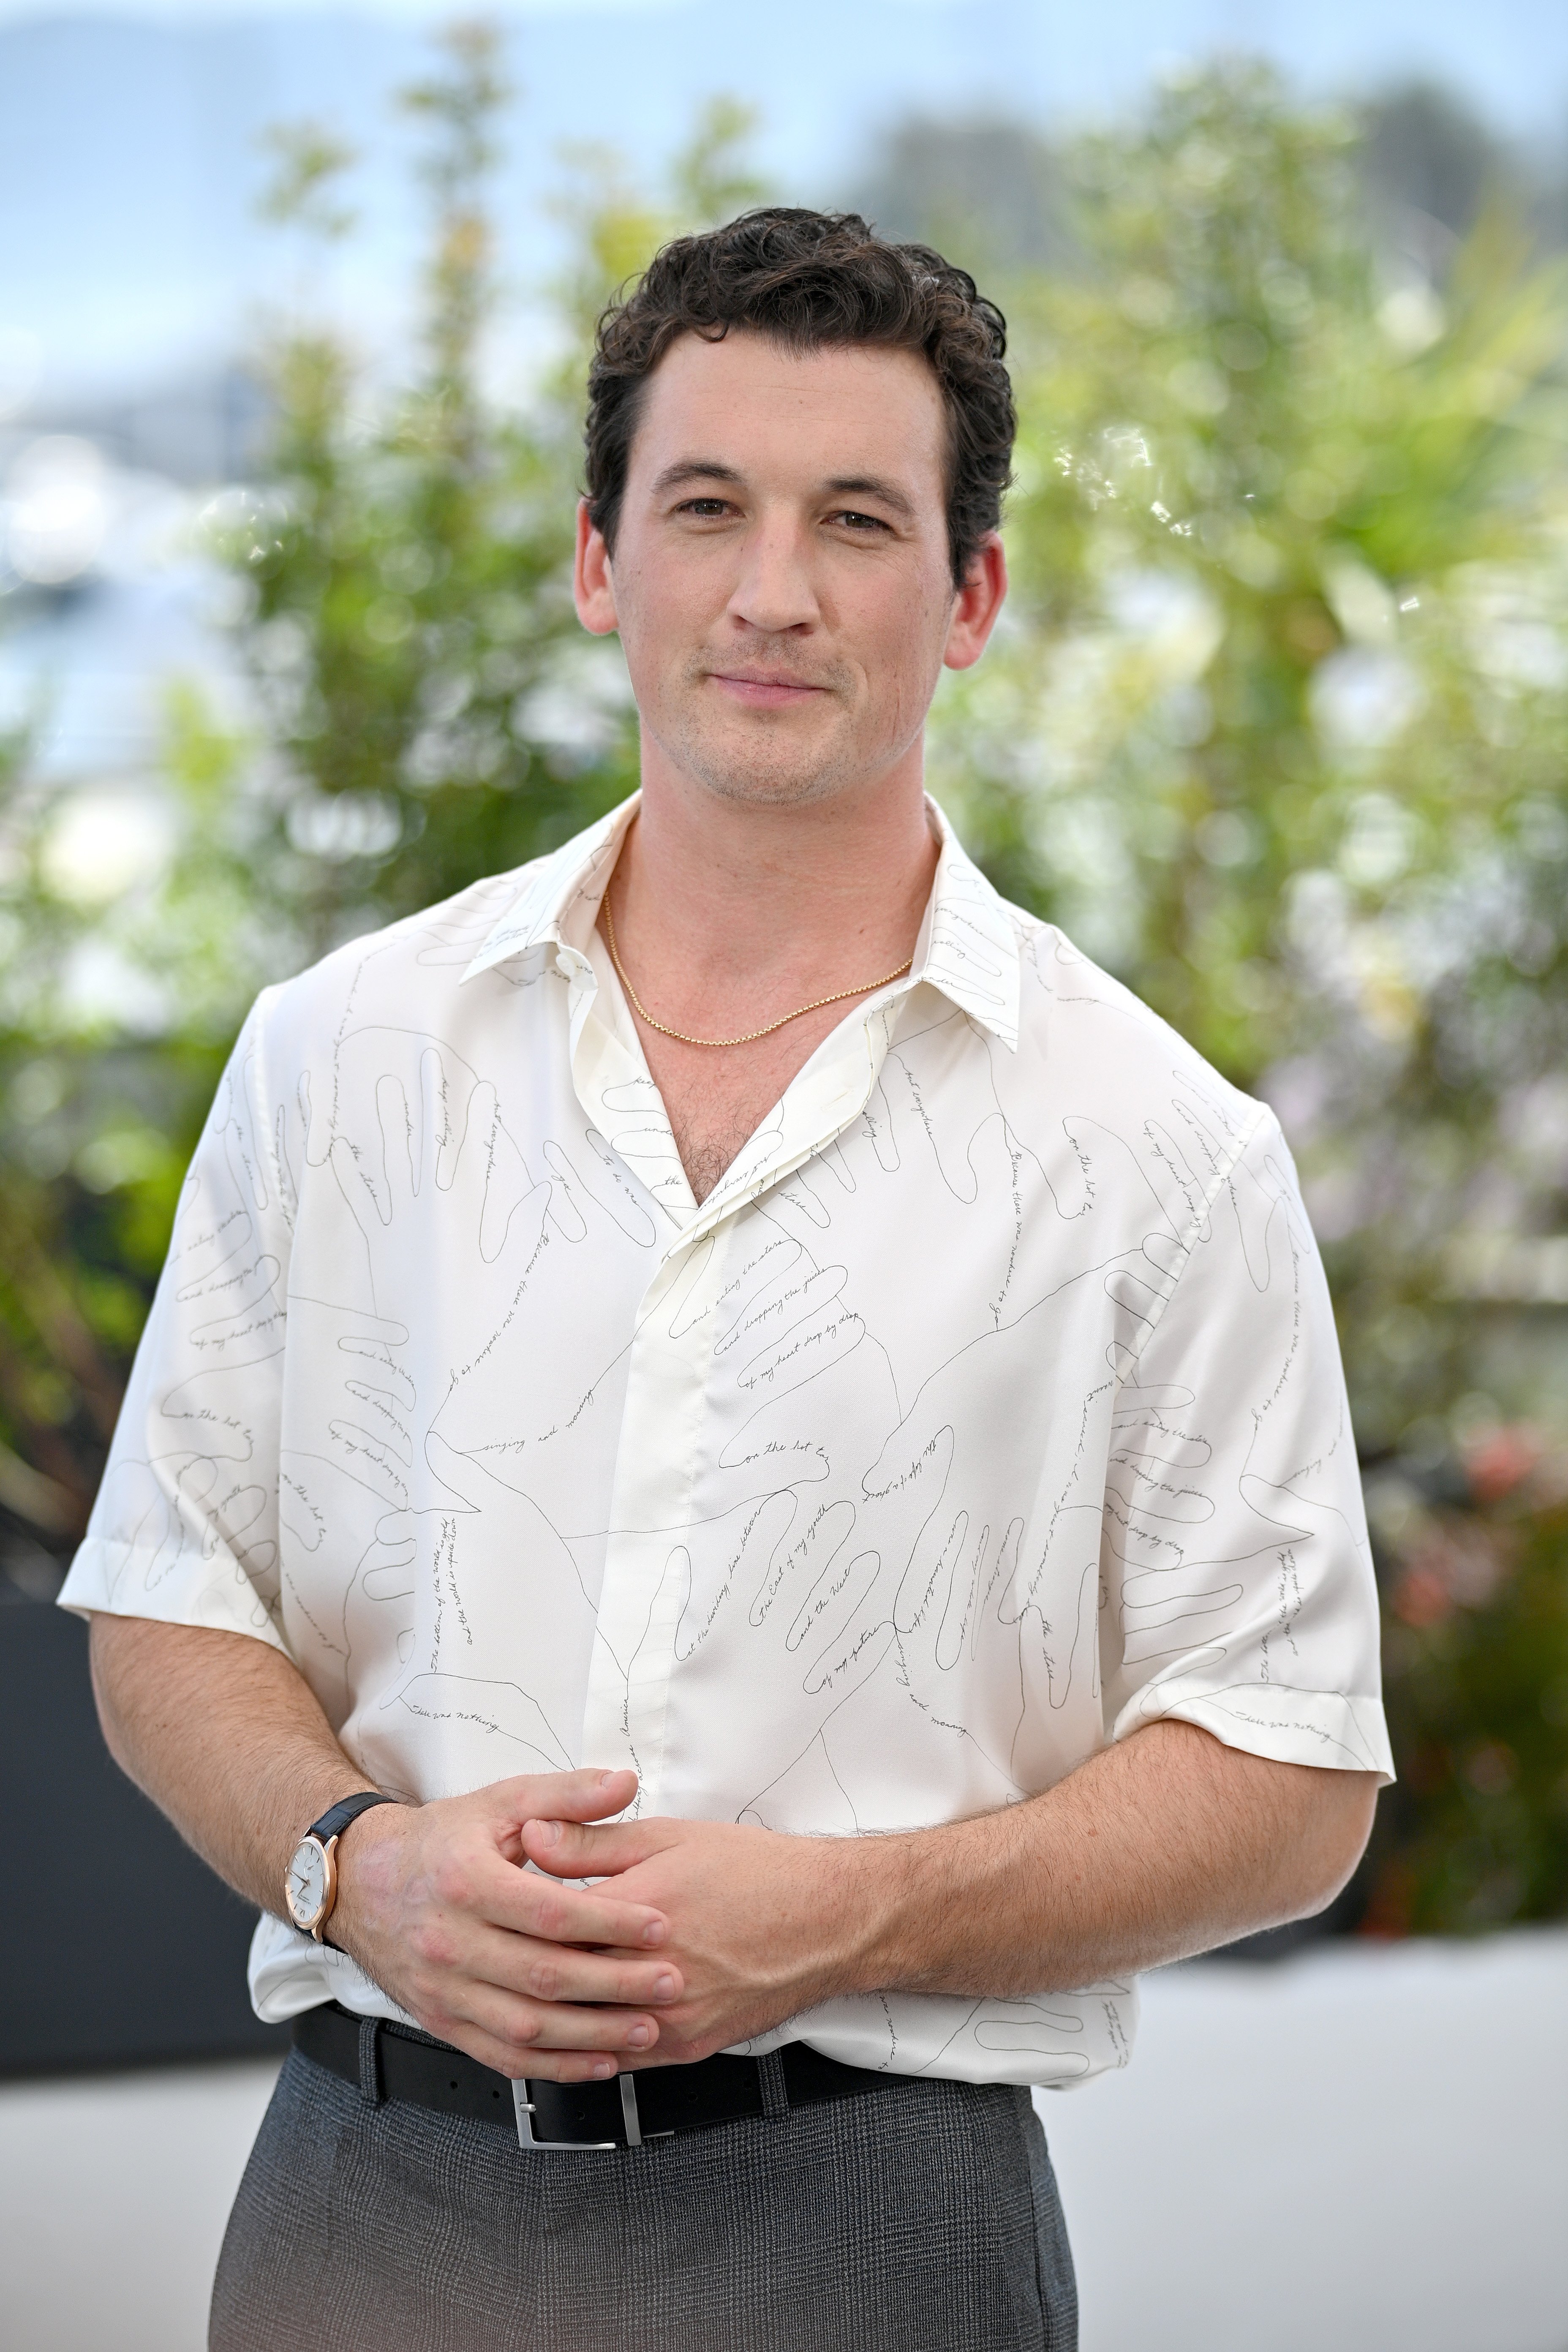 Miles Teller in Cannes, France, on May 18, 2022. | Source: Getty Images